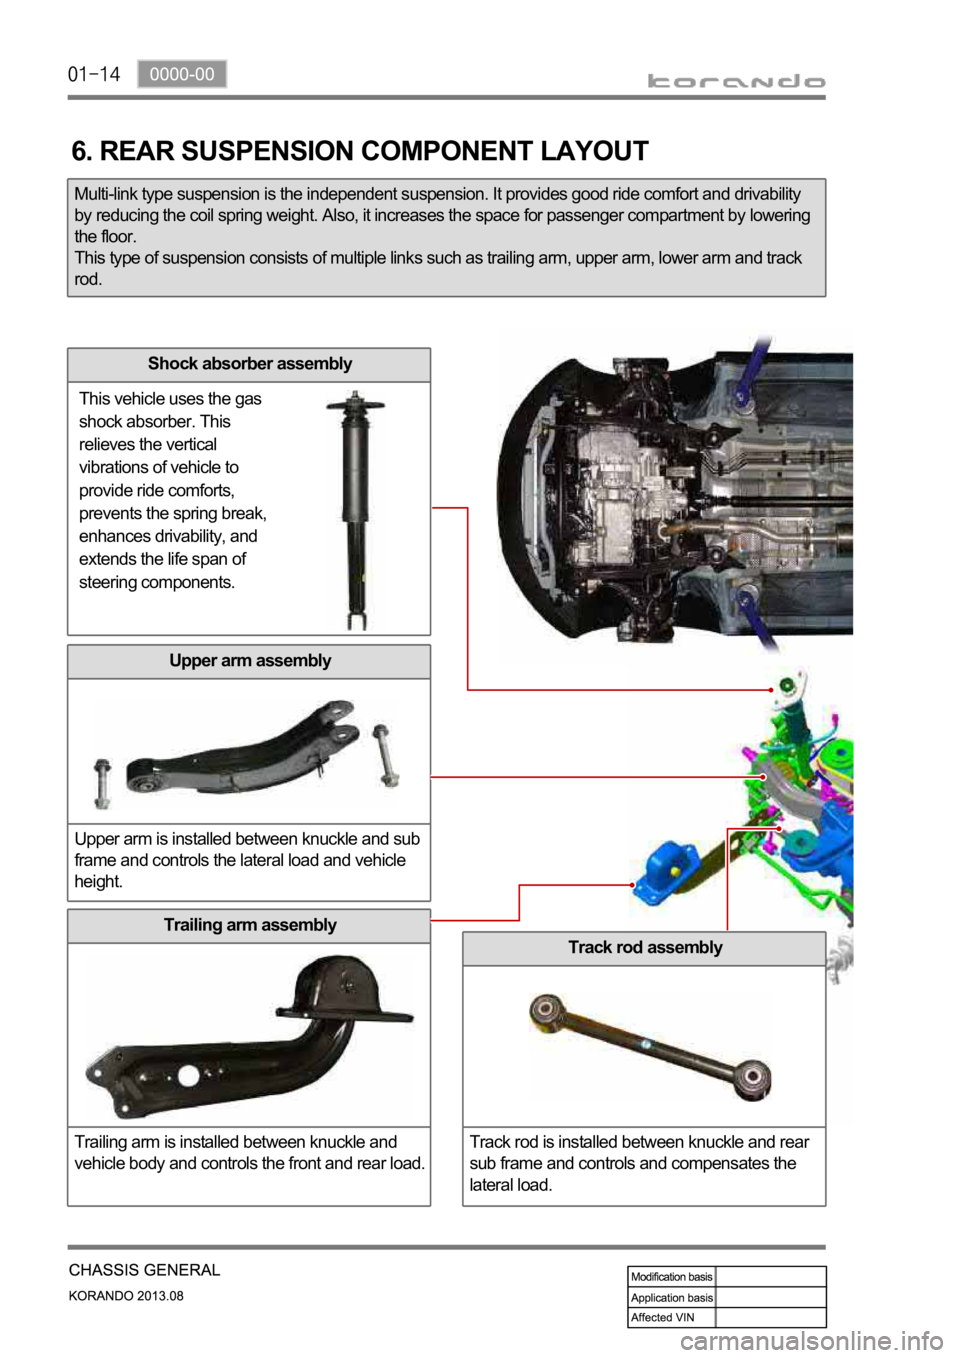 SSANGYONG KORANDO 2013 Owners Guide 6. REAR SUSPENSION COMPONENT LAYOUT
Multi-link type suspension is the independent suspension. It provides good ride comfort and drivability 
by reducing the coil spring weight. Also, it increases the 